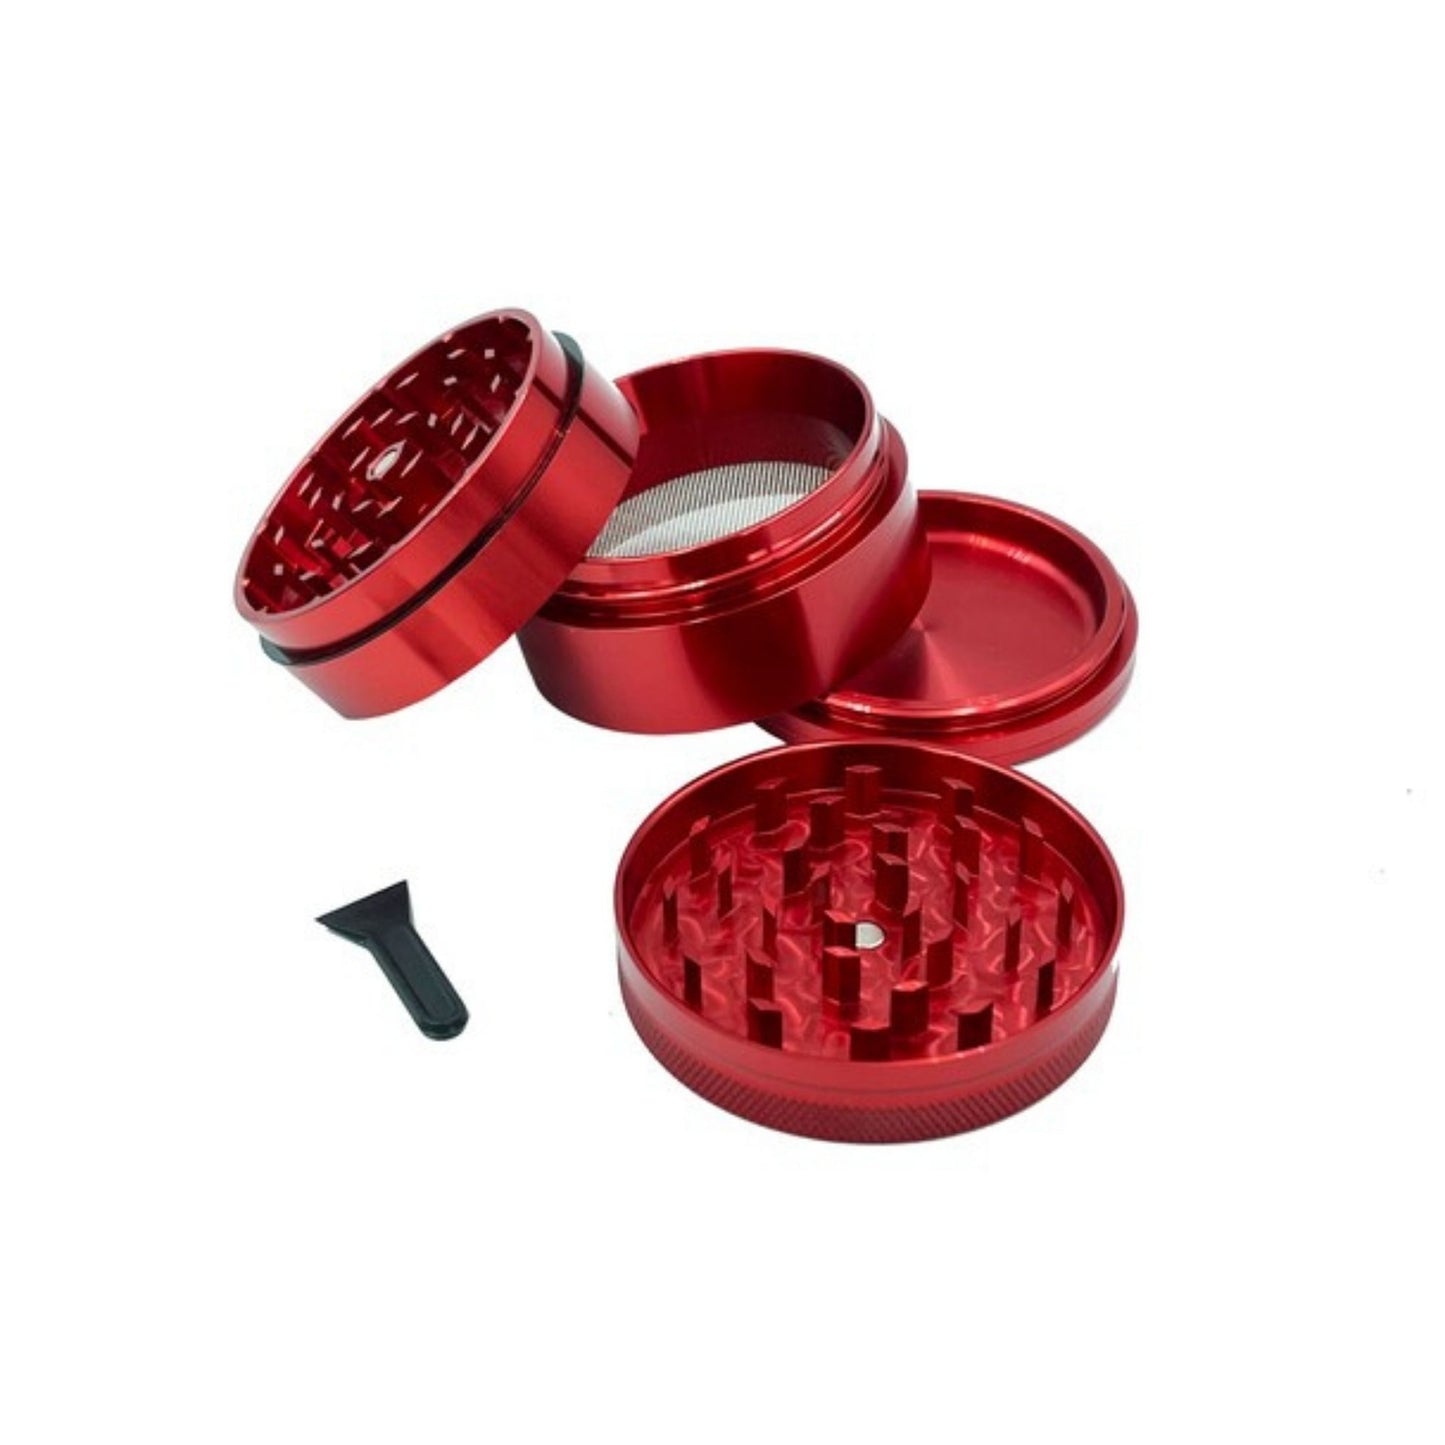 Elements 4 Piece Herb Grinder - Anodized Red